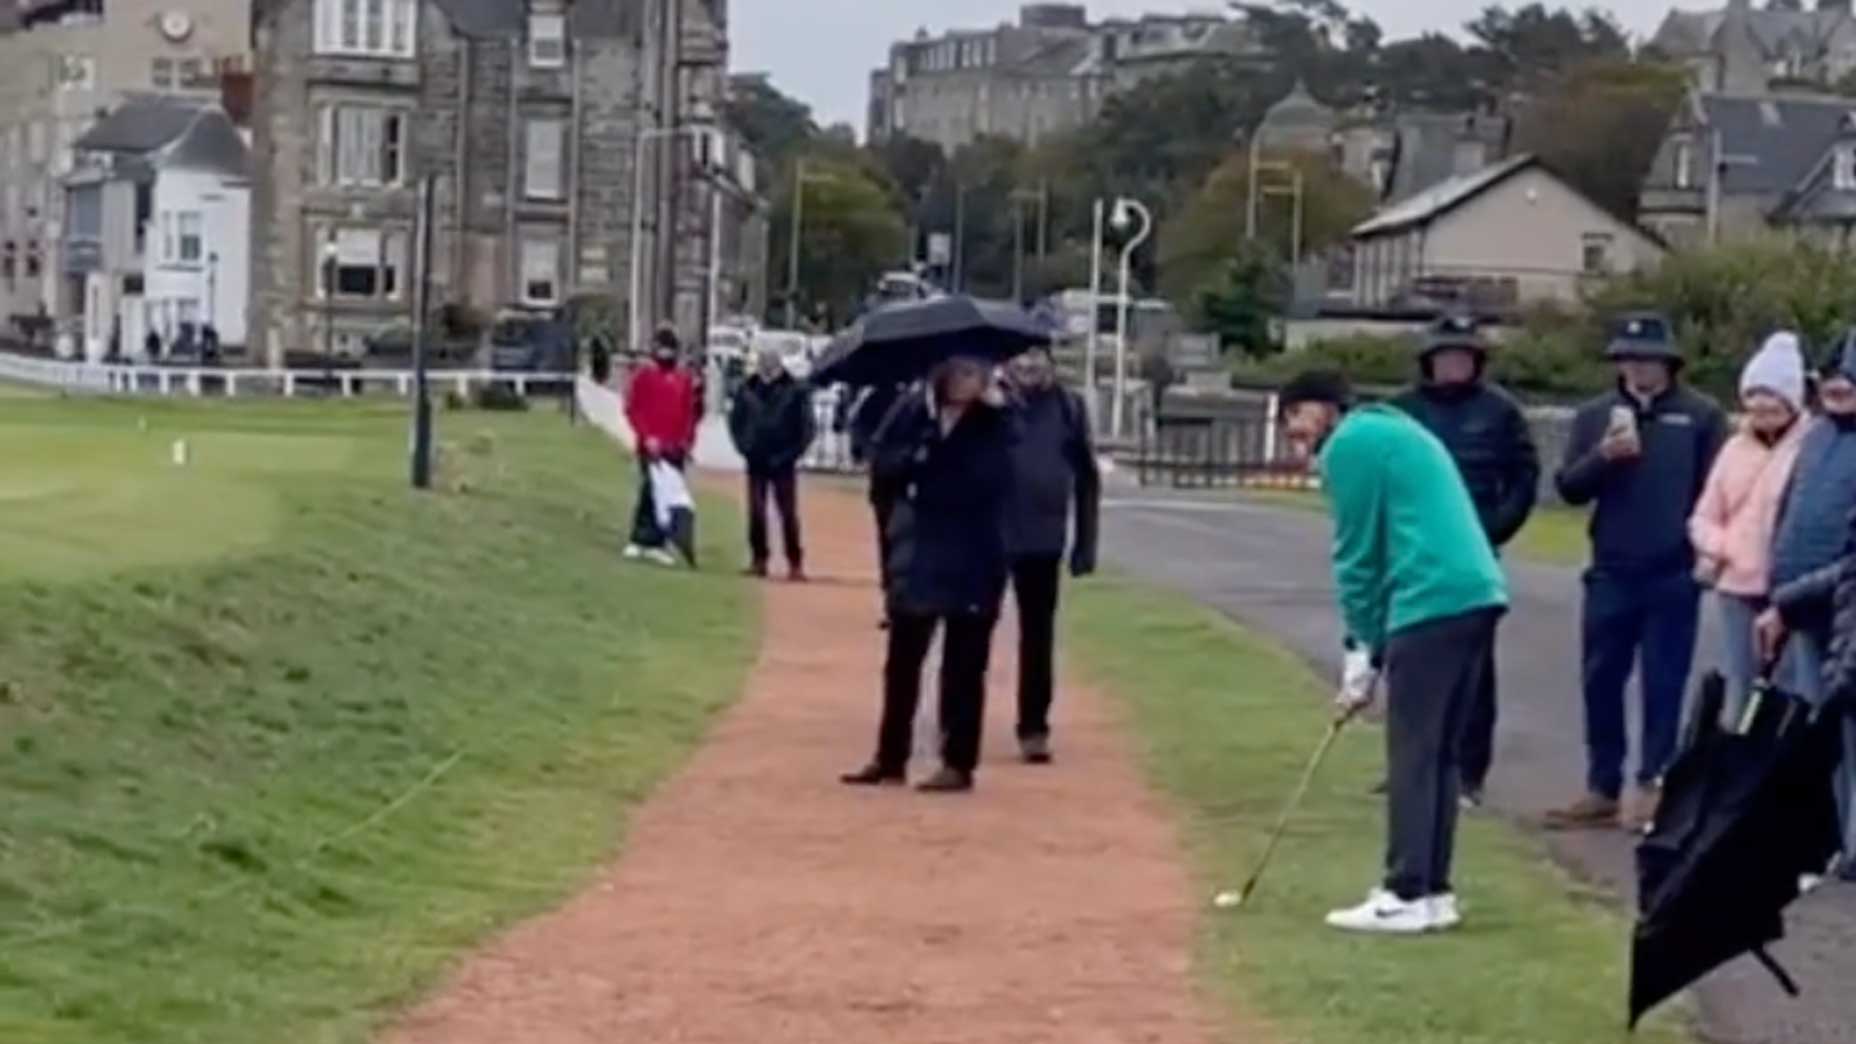 Tommy Fleetwood lines up a shot at St. Andrews.